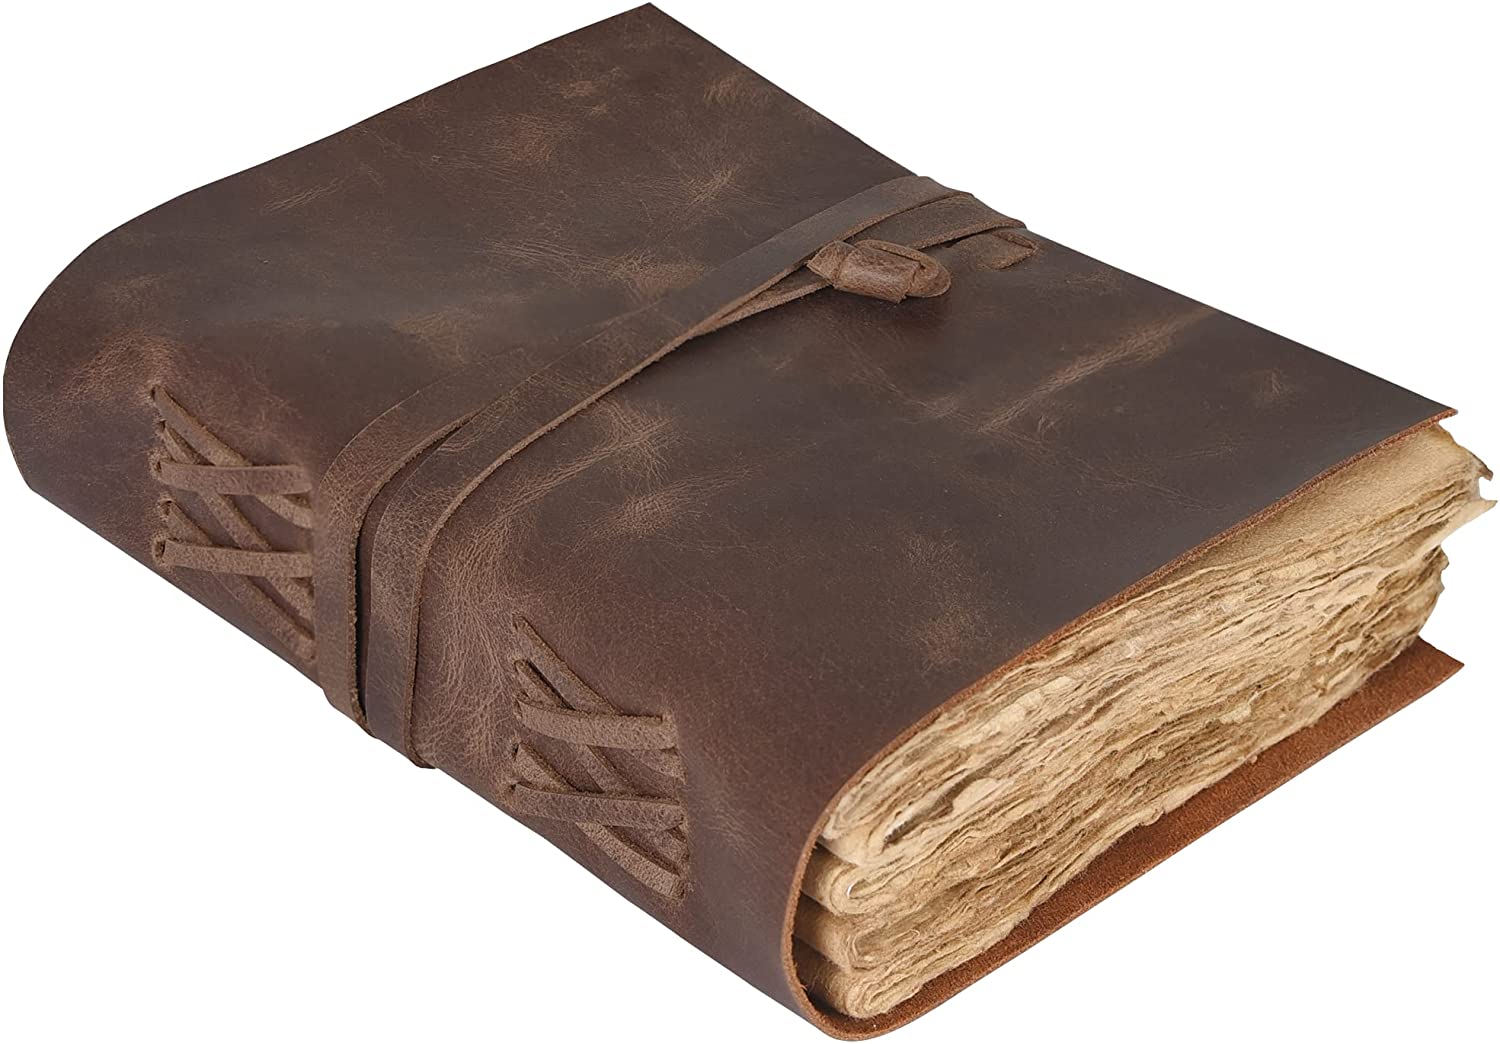 Classic Leather Journal with Unlined Pages - 9x12